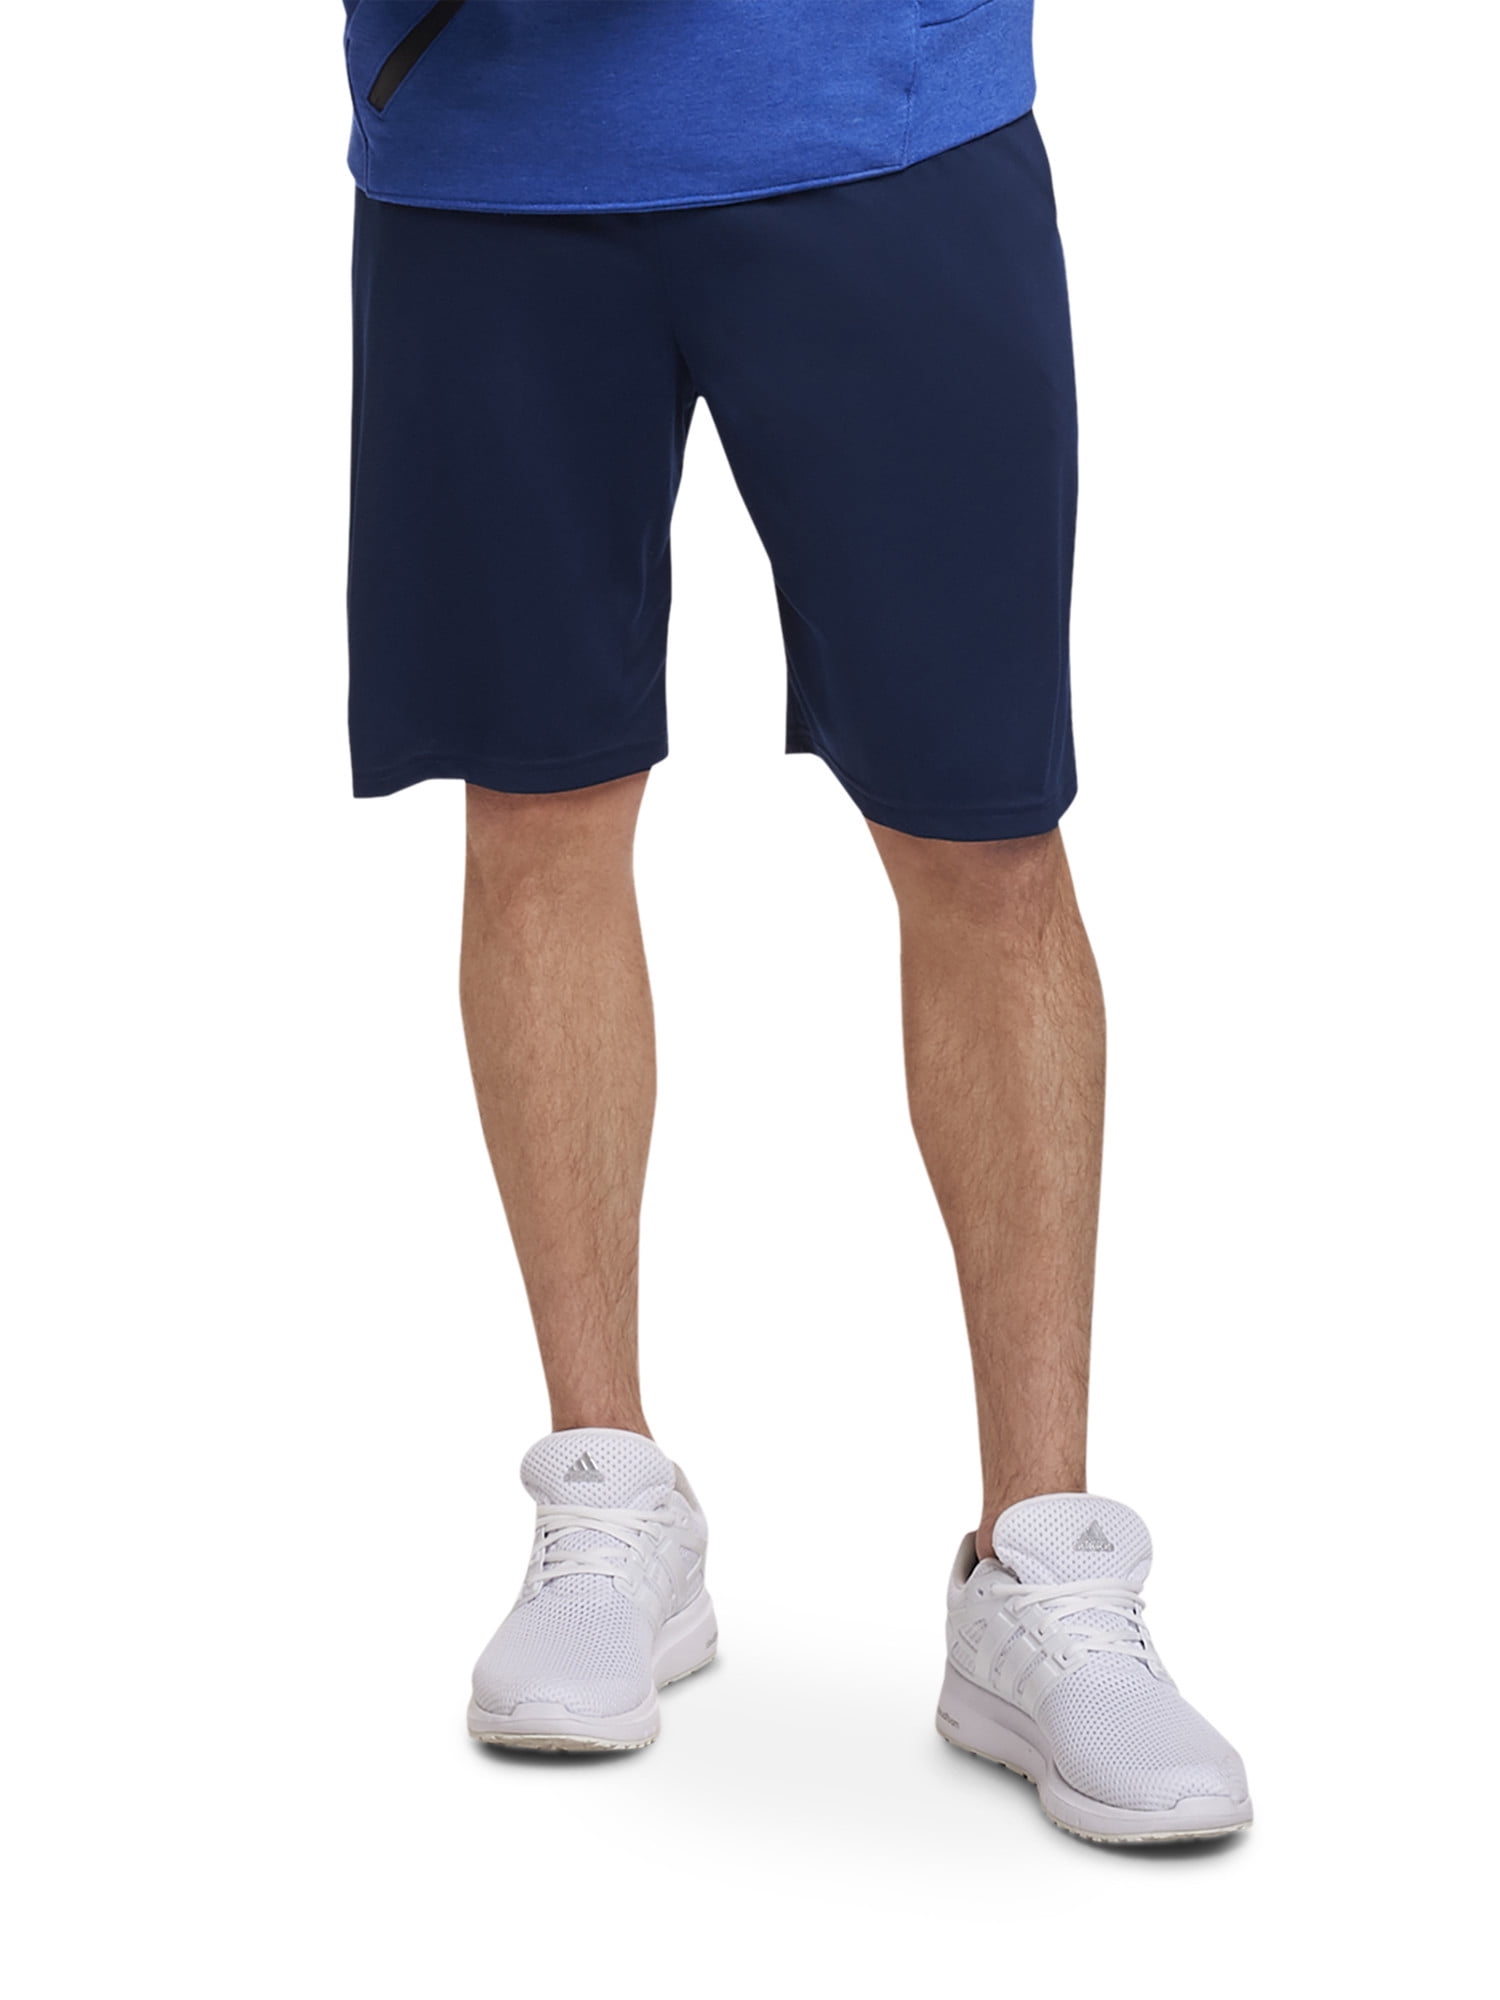 Buy > russell men's core performance shorts > in stock